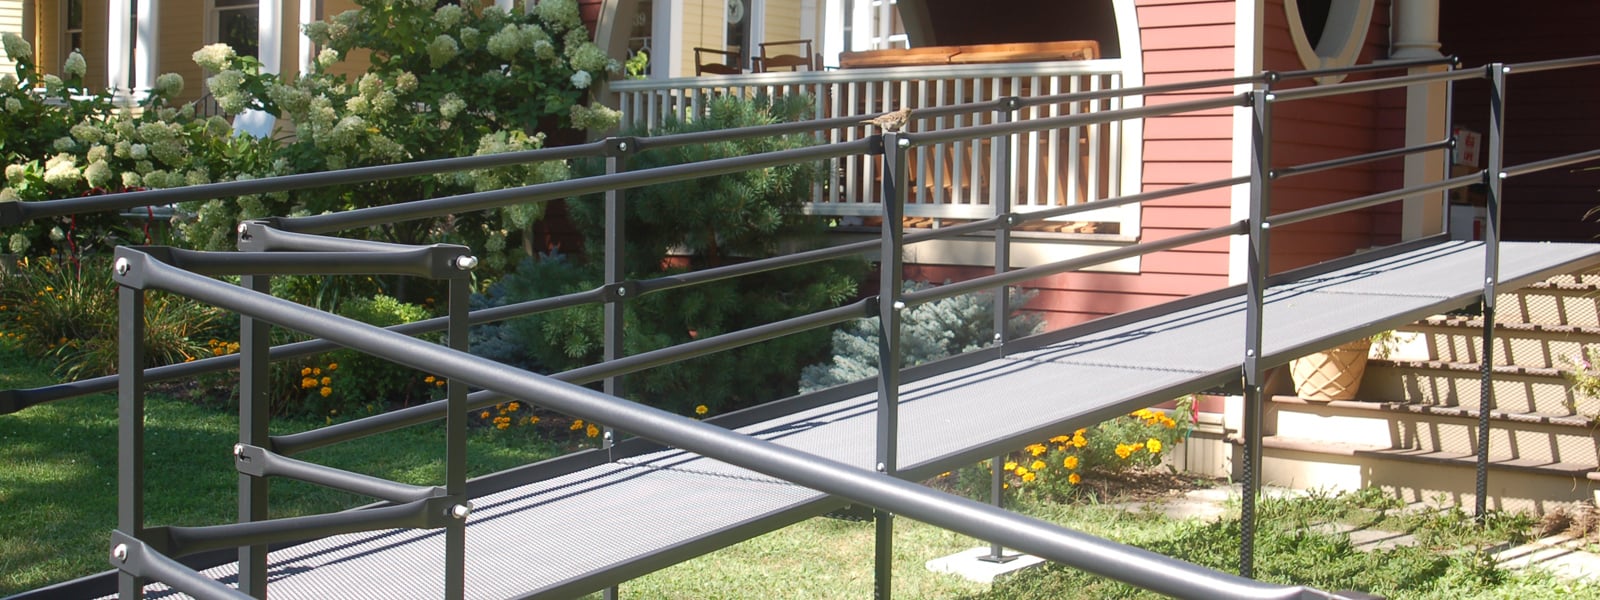 Galvanized Steel Wheelchair Access Ramp at a Home